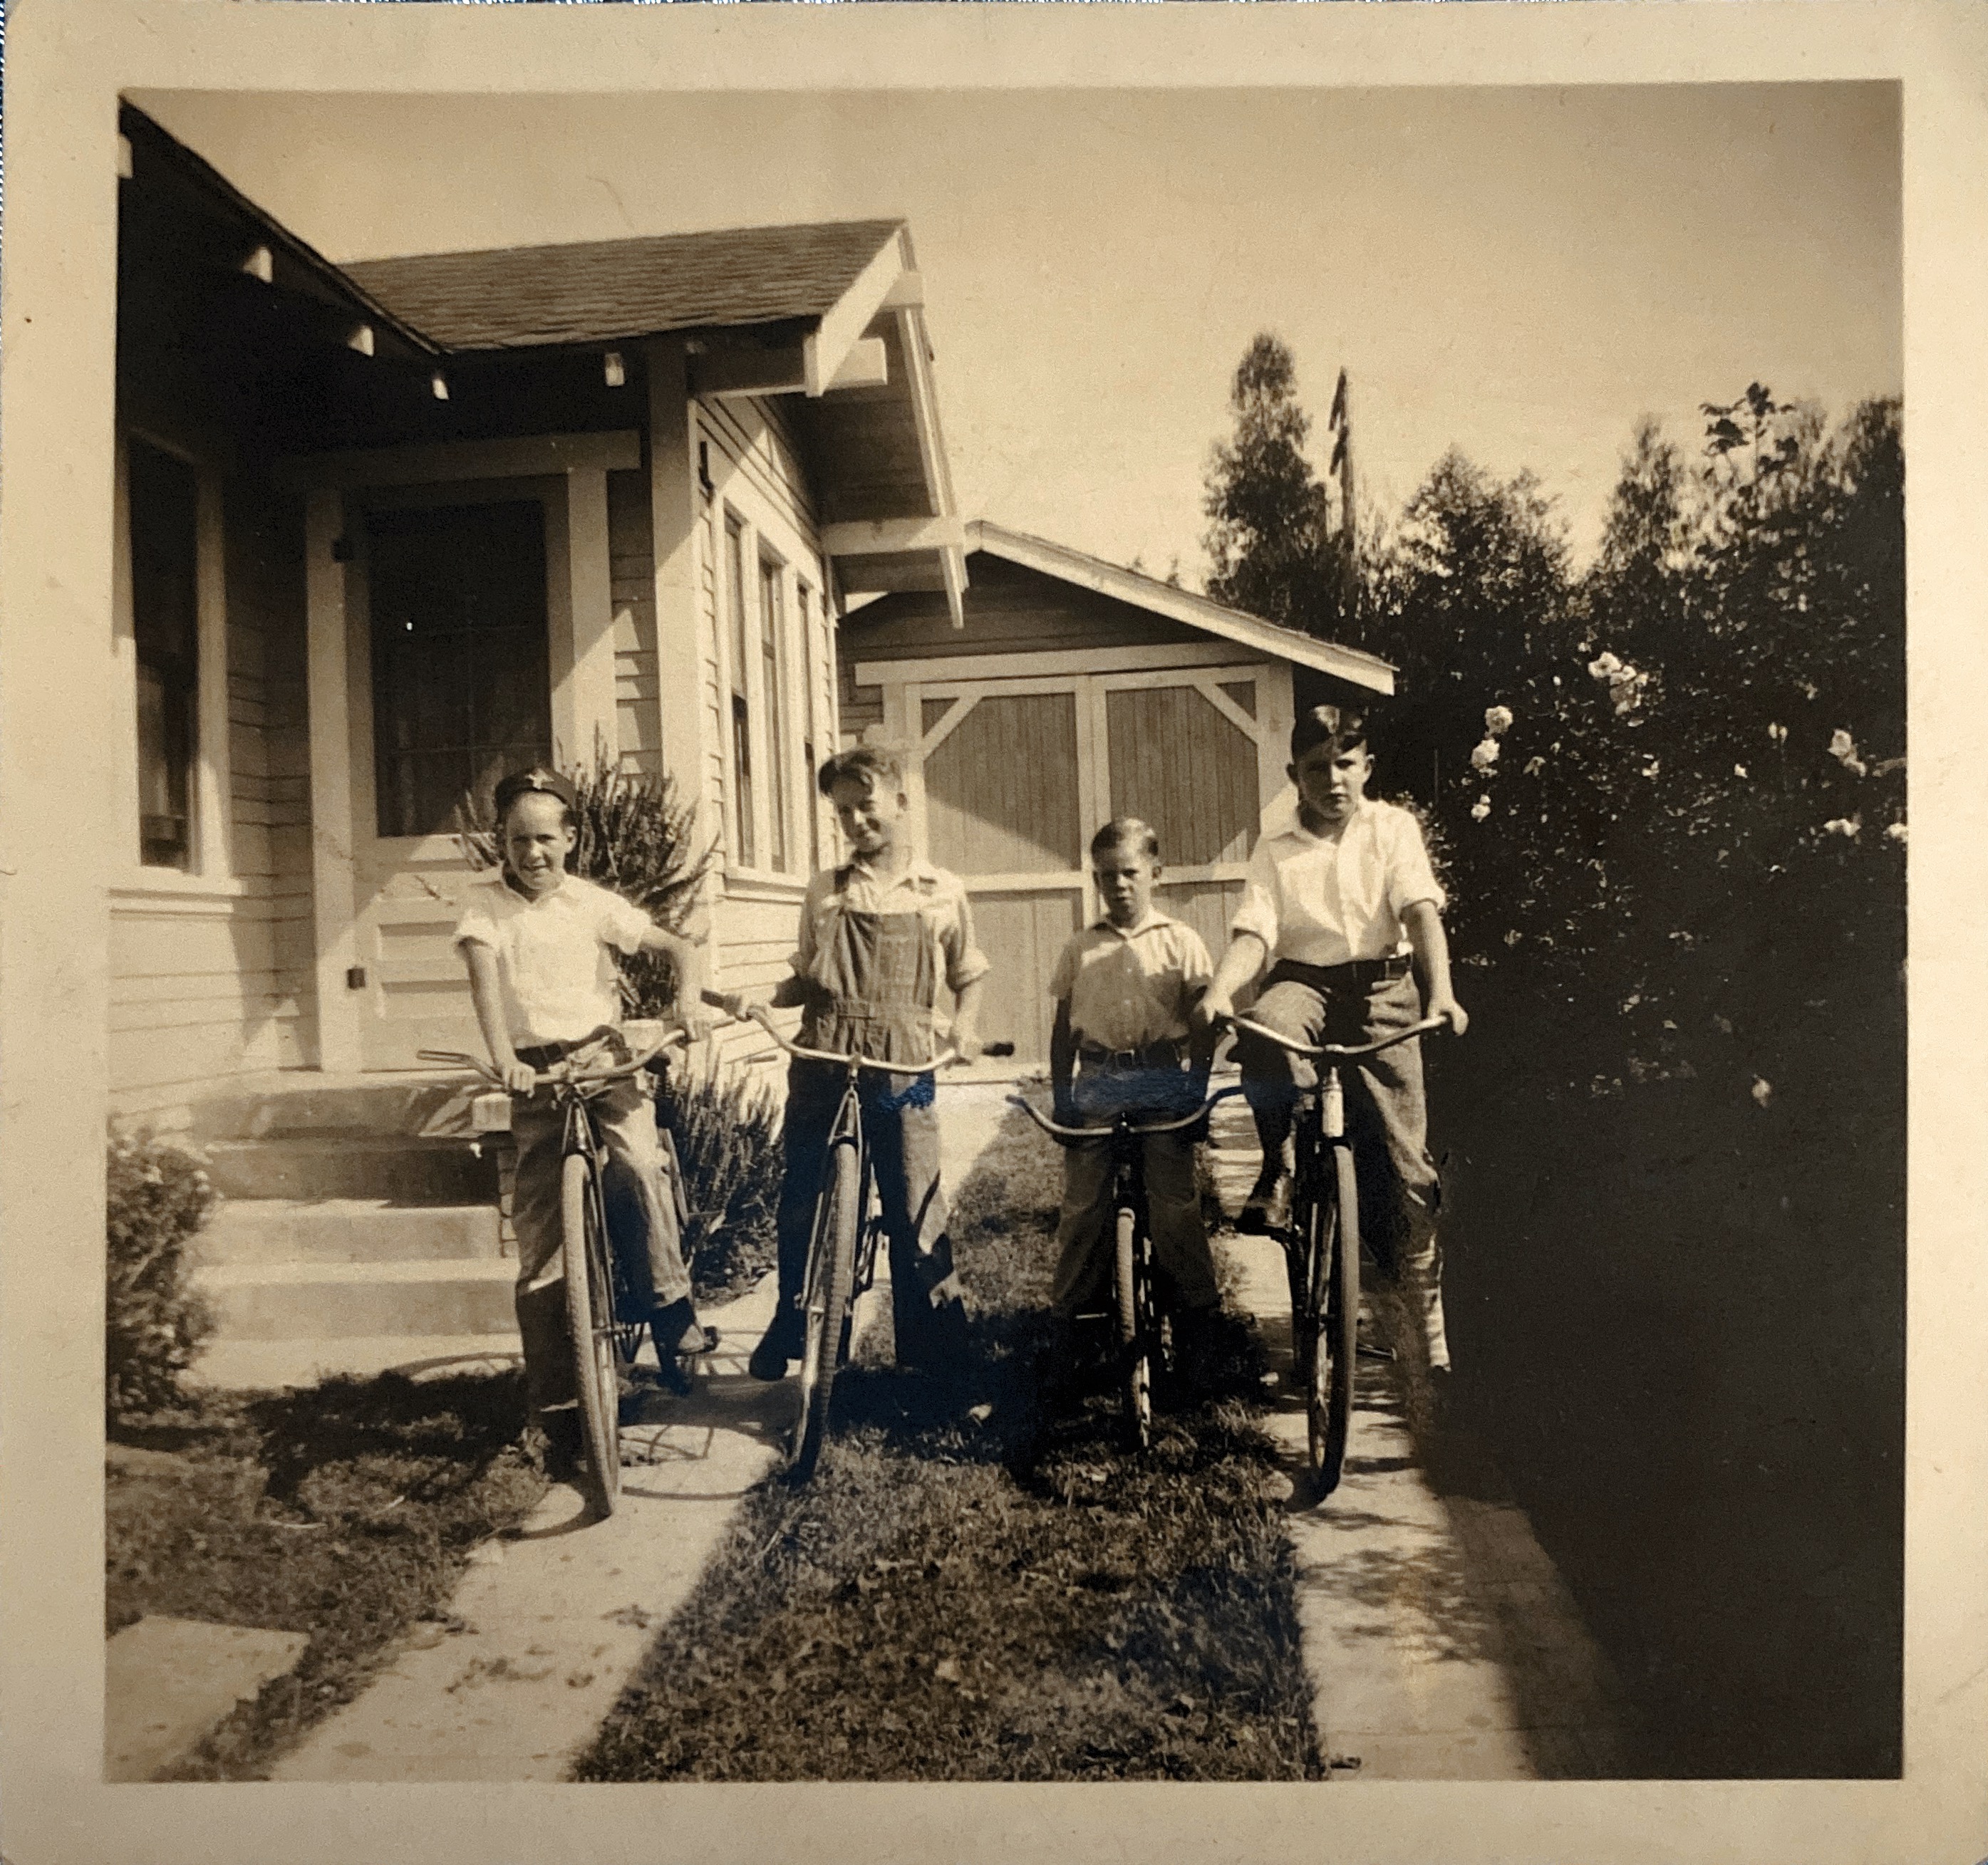 Ward White and his buddies ready to ride. 
In the driveway of his house in Pomona
Probably about 1930
Ward is on the right